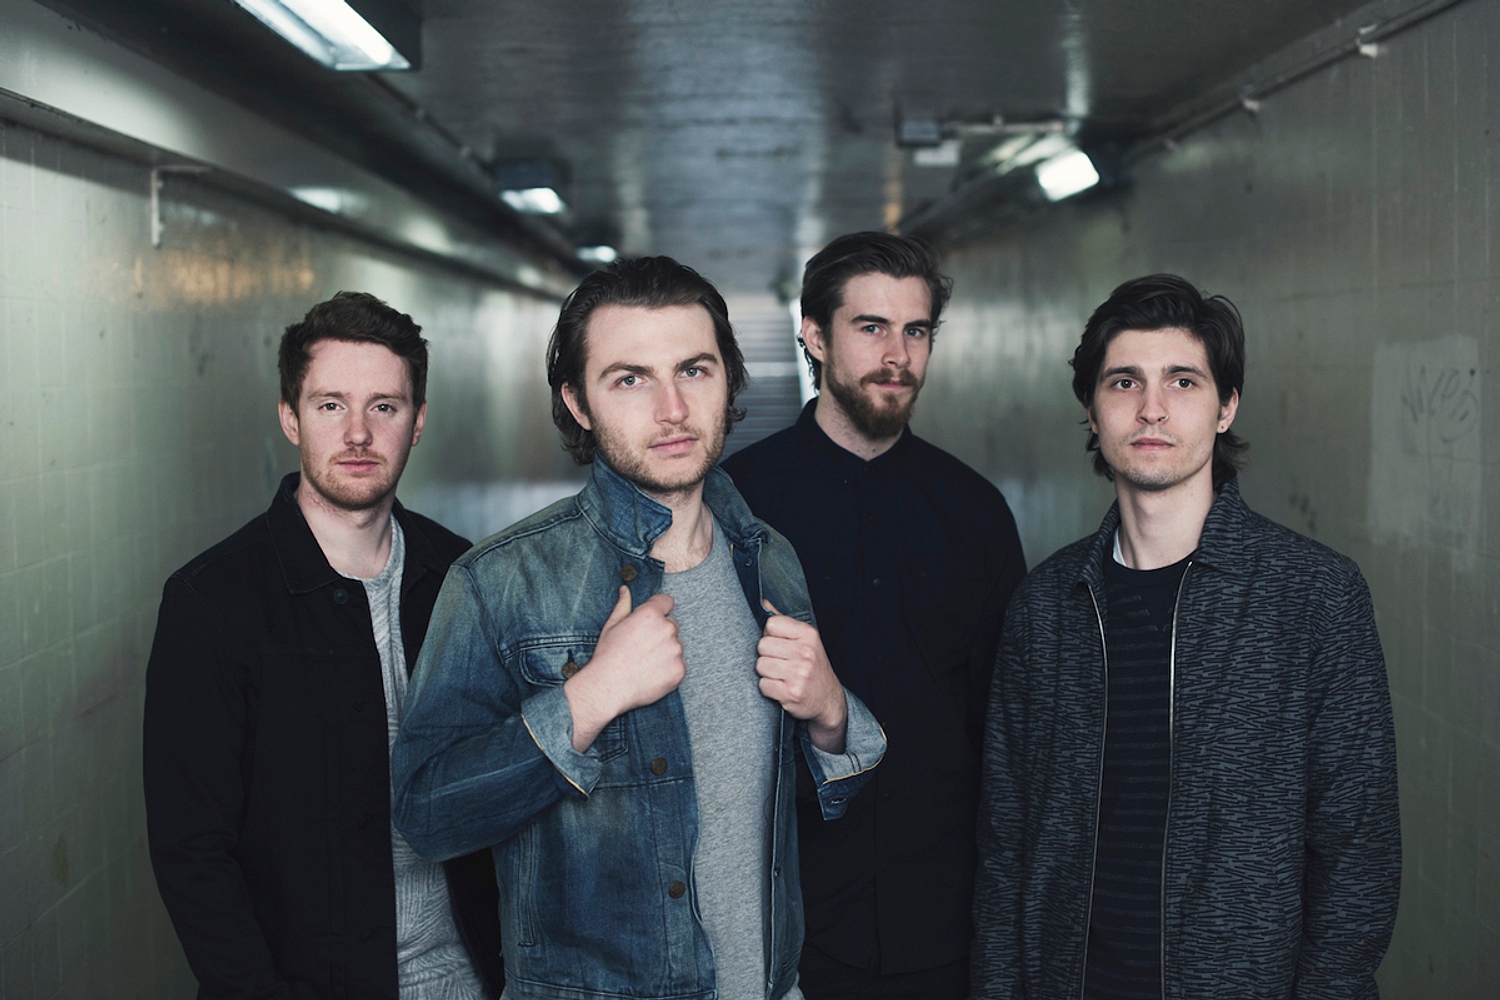 We Are The Ocean reveal new track ‘Holy Fire’